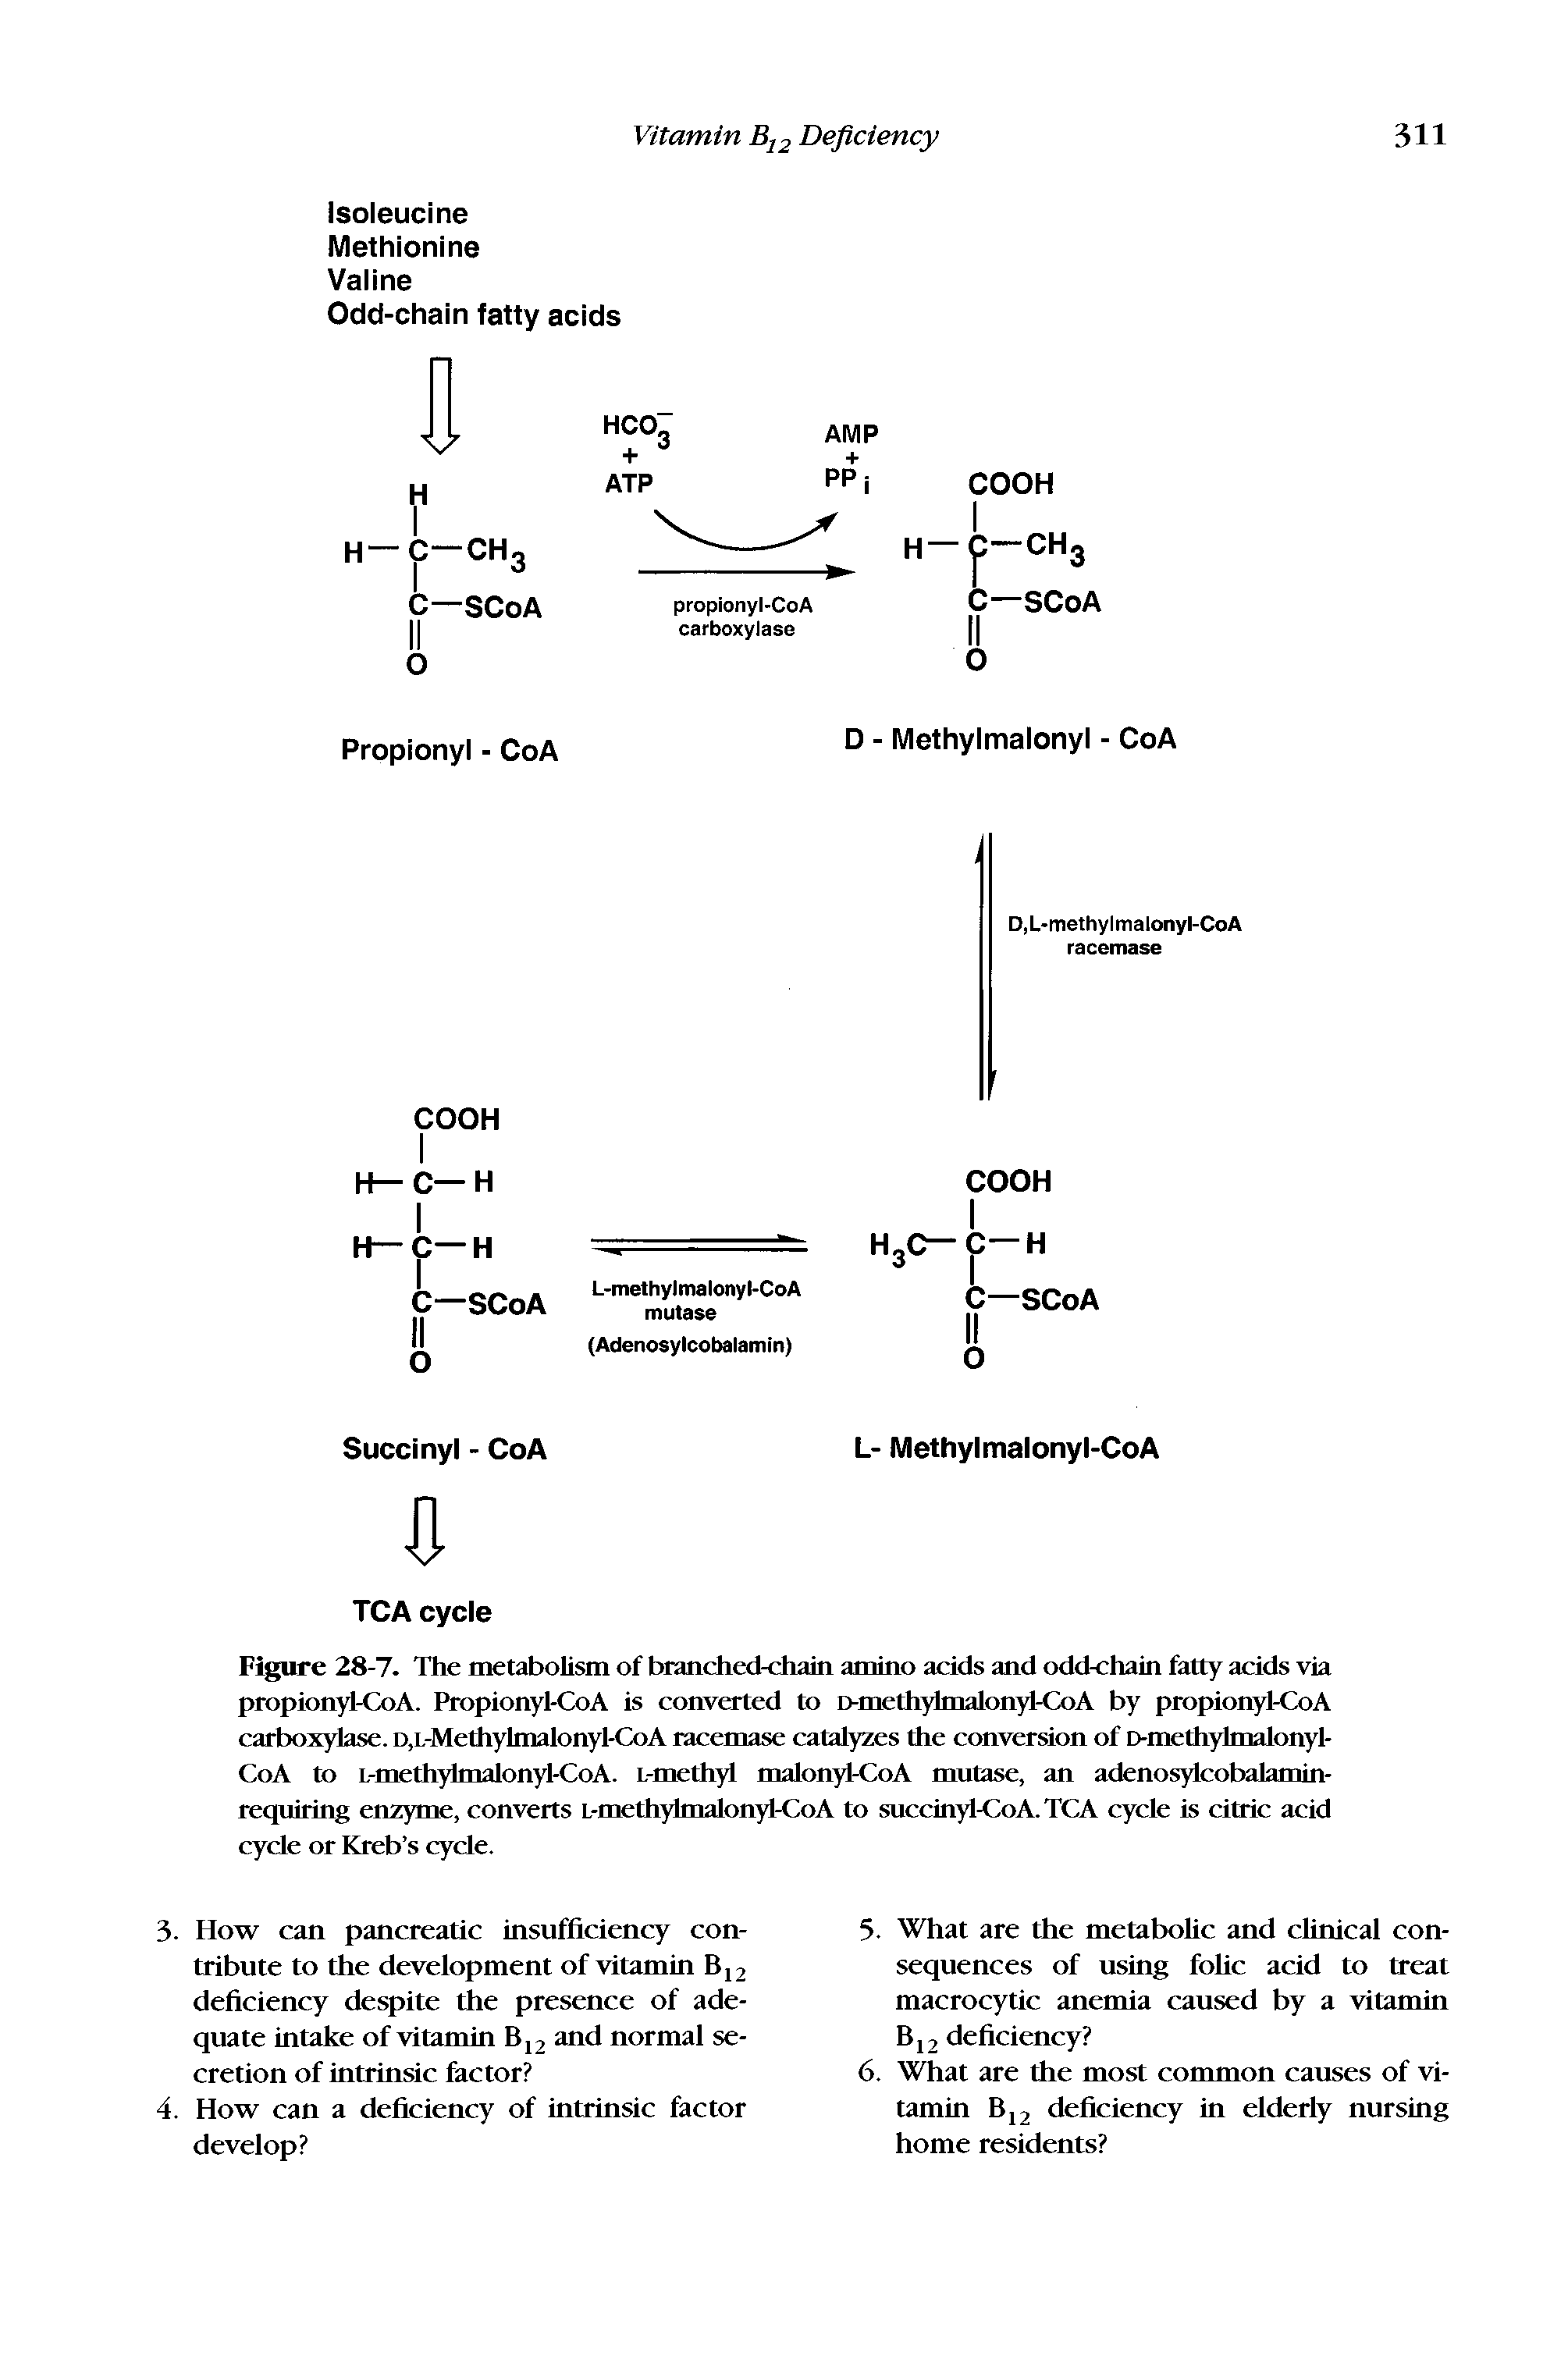 Figure 28-7. The metabolism of branched-chain amino acids and odd-chain fatty acids via propionyl-CoA. Propionyl-CoA is converted to D-methylmalonyl-CoA by propionyl-CoA carboxylase. D,L-Methylmalonyl-CoA racemase catalyzes the conversion of D-methylmalonyl-CoA to L-methylmalonyl-CoA. L-methyl malonyl-CoA mutase, an adenosyicobalamin-requiring enzyme, converts L-methylmalonyl-CoA to succinyl-CoA.TCA cycle is citric acid cycle or Kreb s cycle.